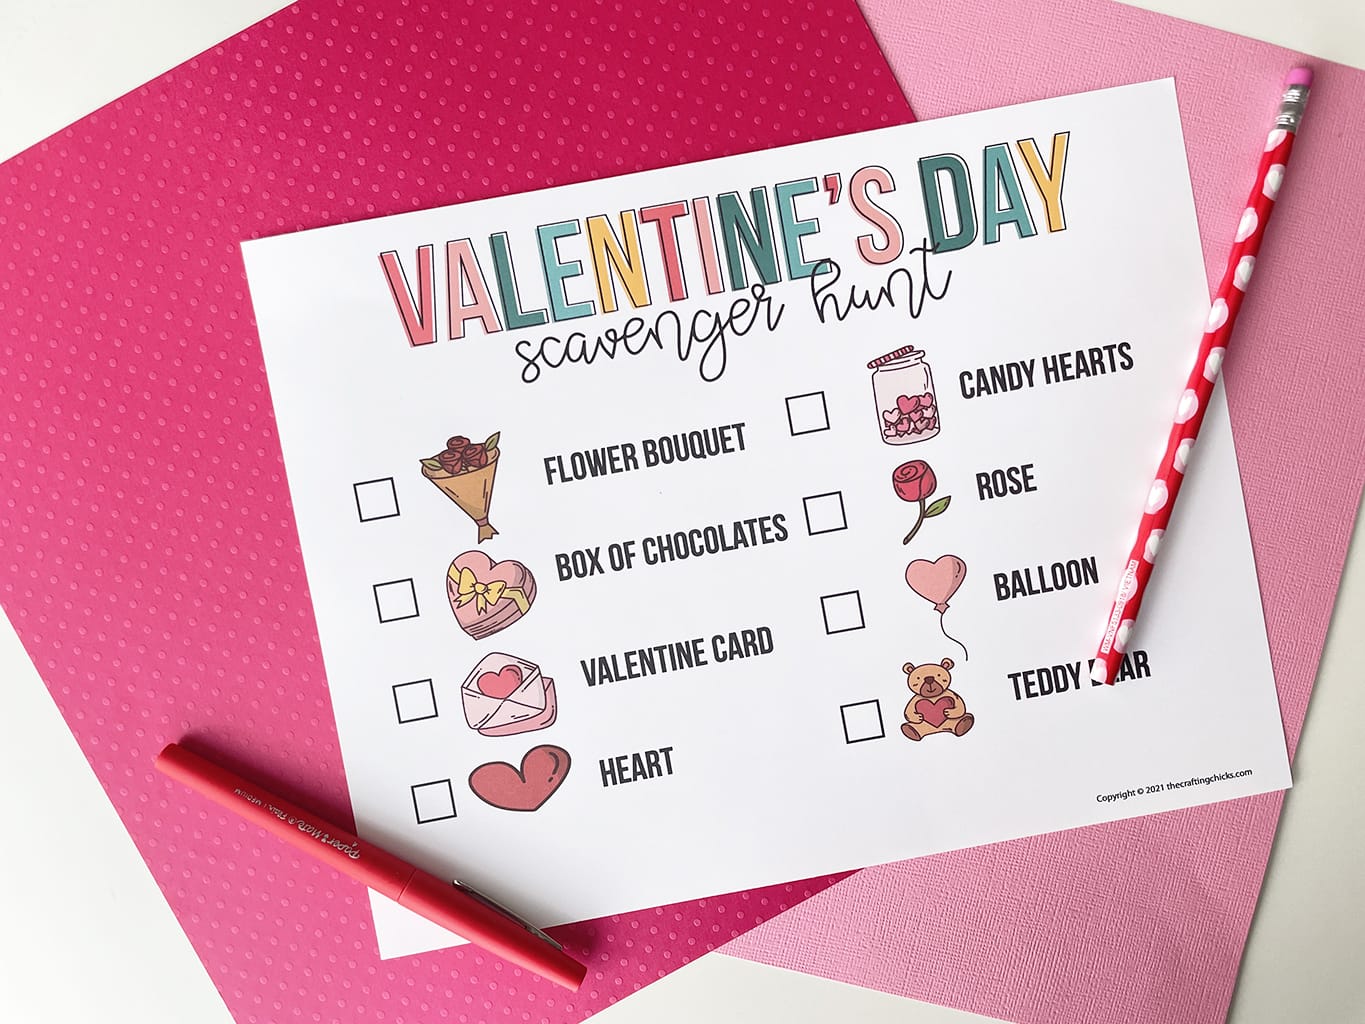 Printable of the Valentine's Day Scavenger Hunt printed out and placed on a white table, with dark pink and light pink paper behind it. Red fine line marker is on the left side and a valentine pencil is on the right side.